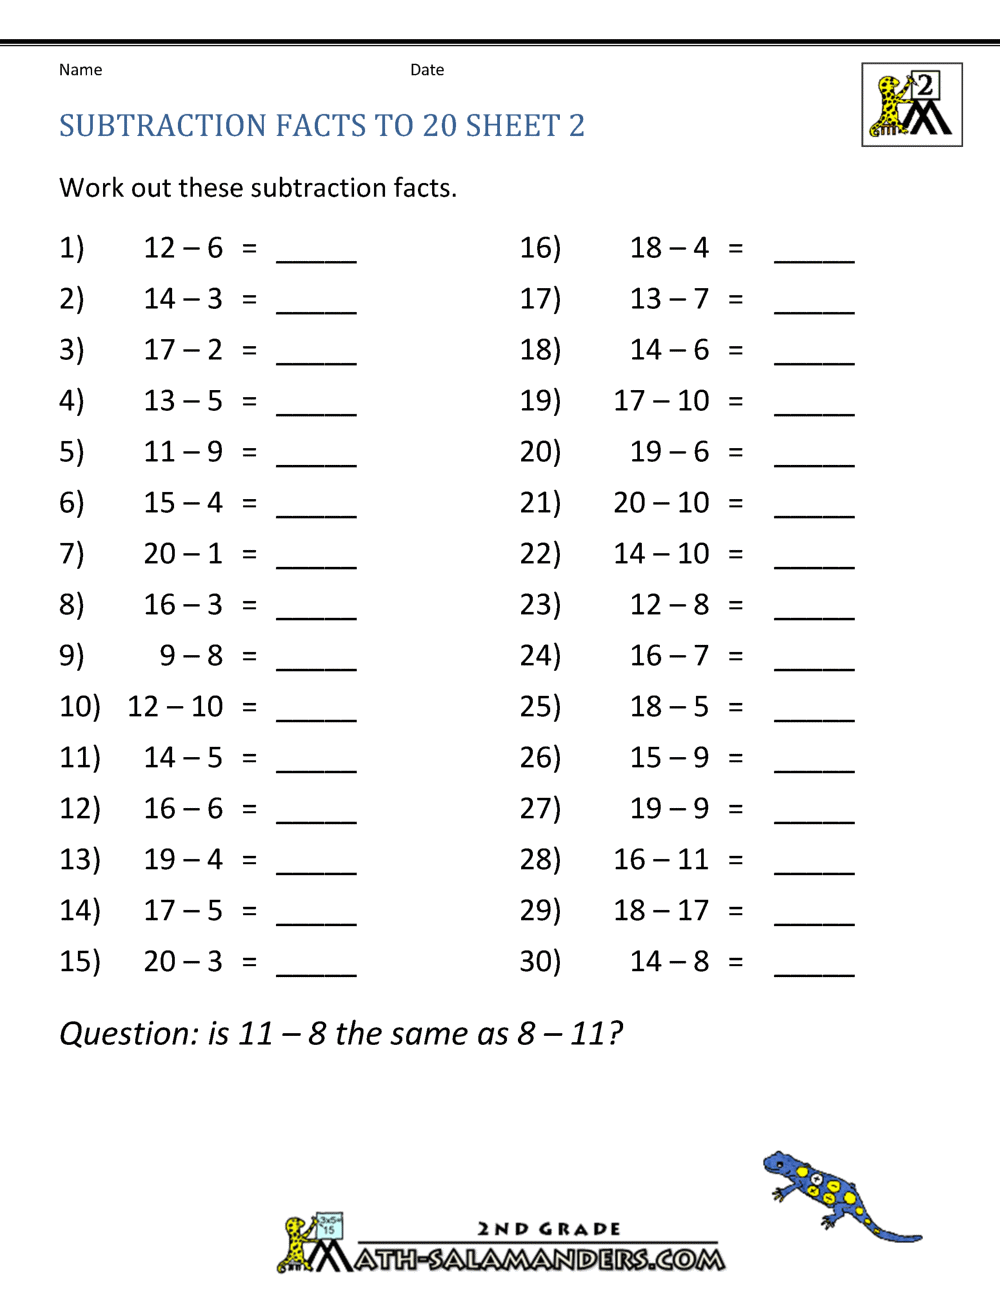 Subtraction Facts To 20 Worksheets Lusomentepalavras